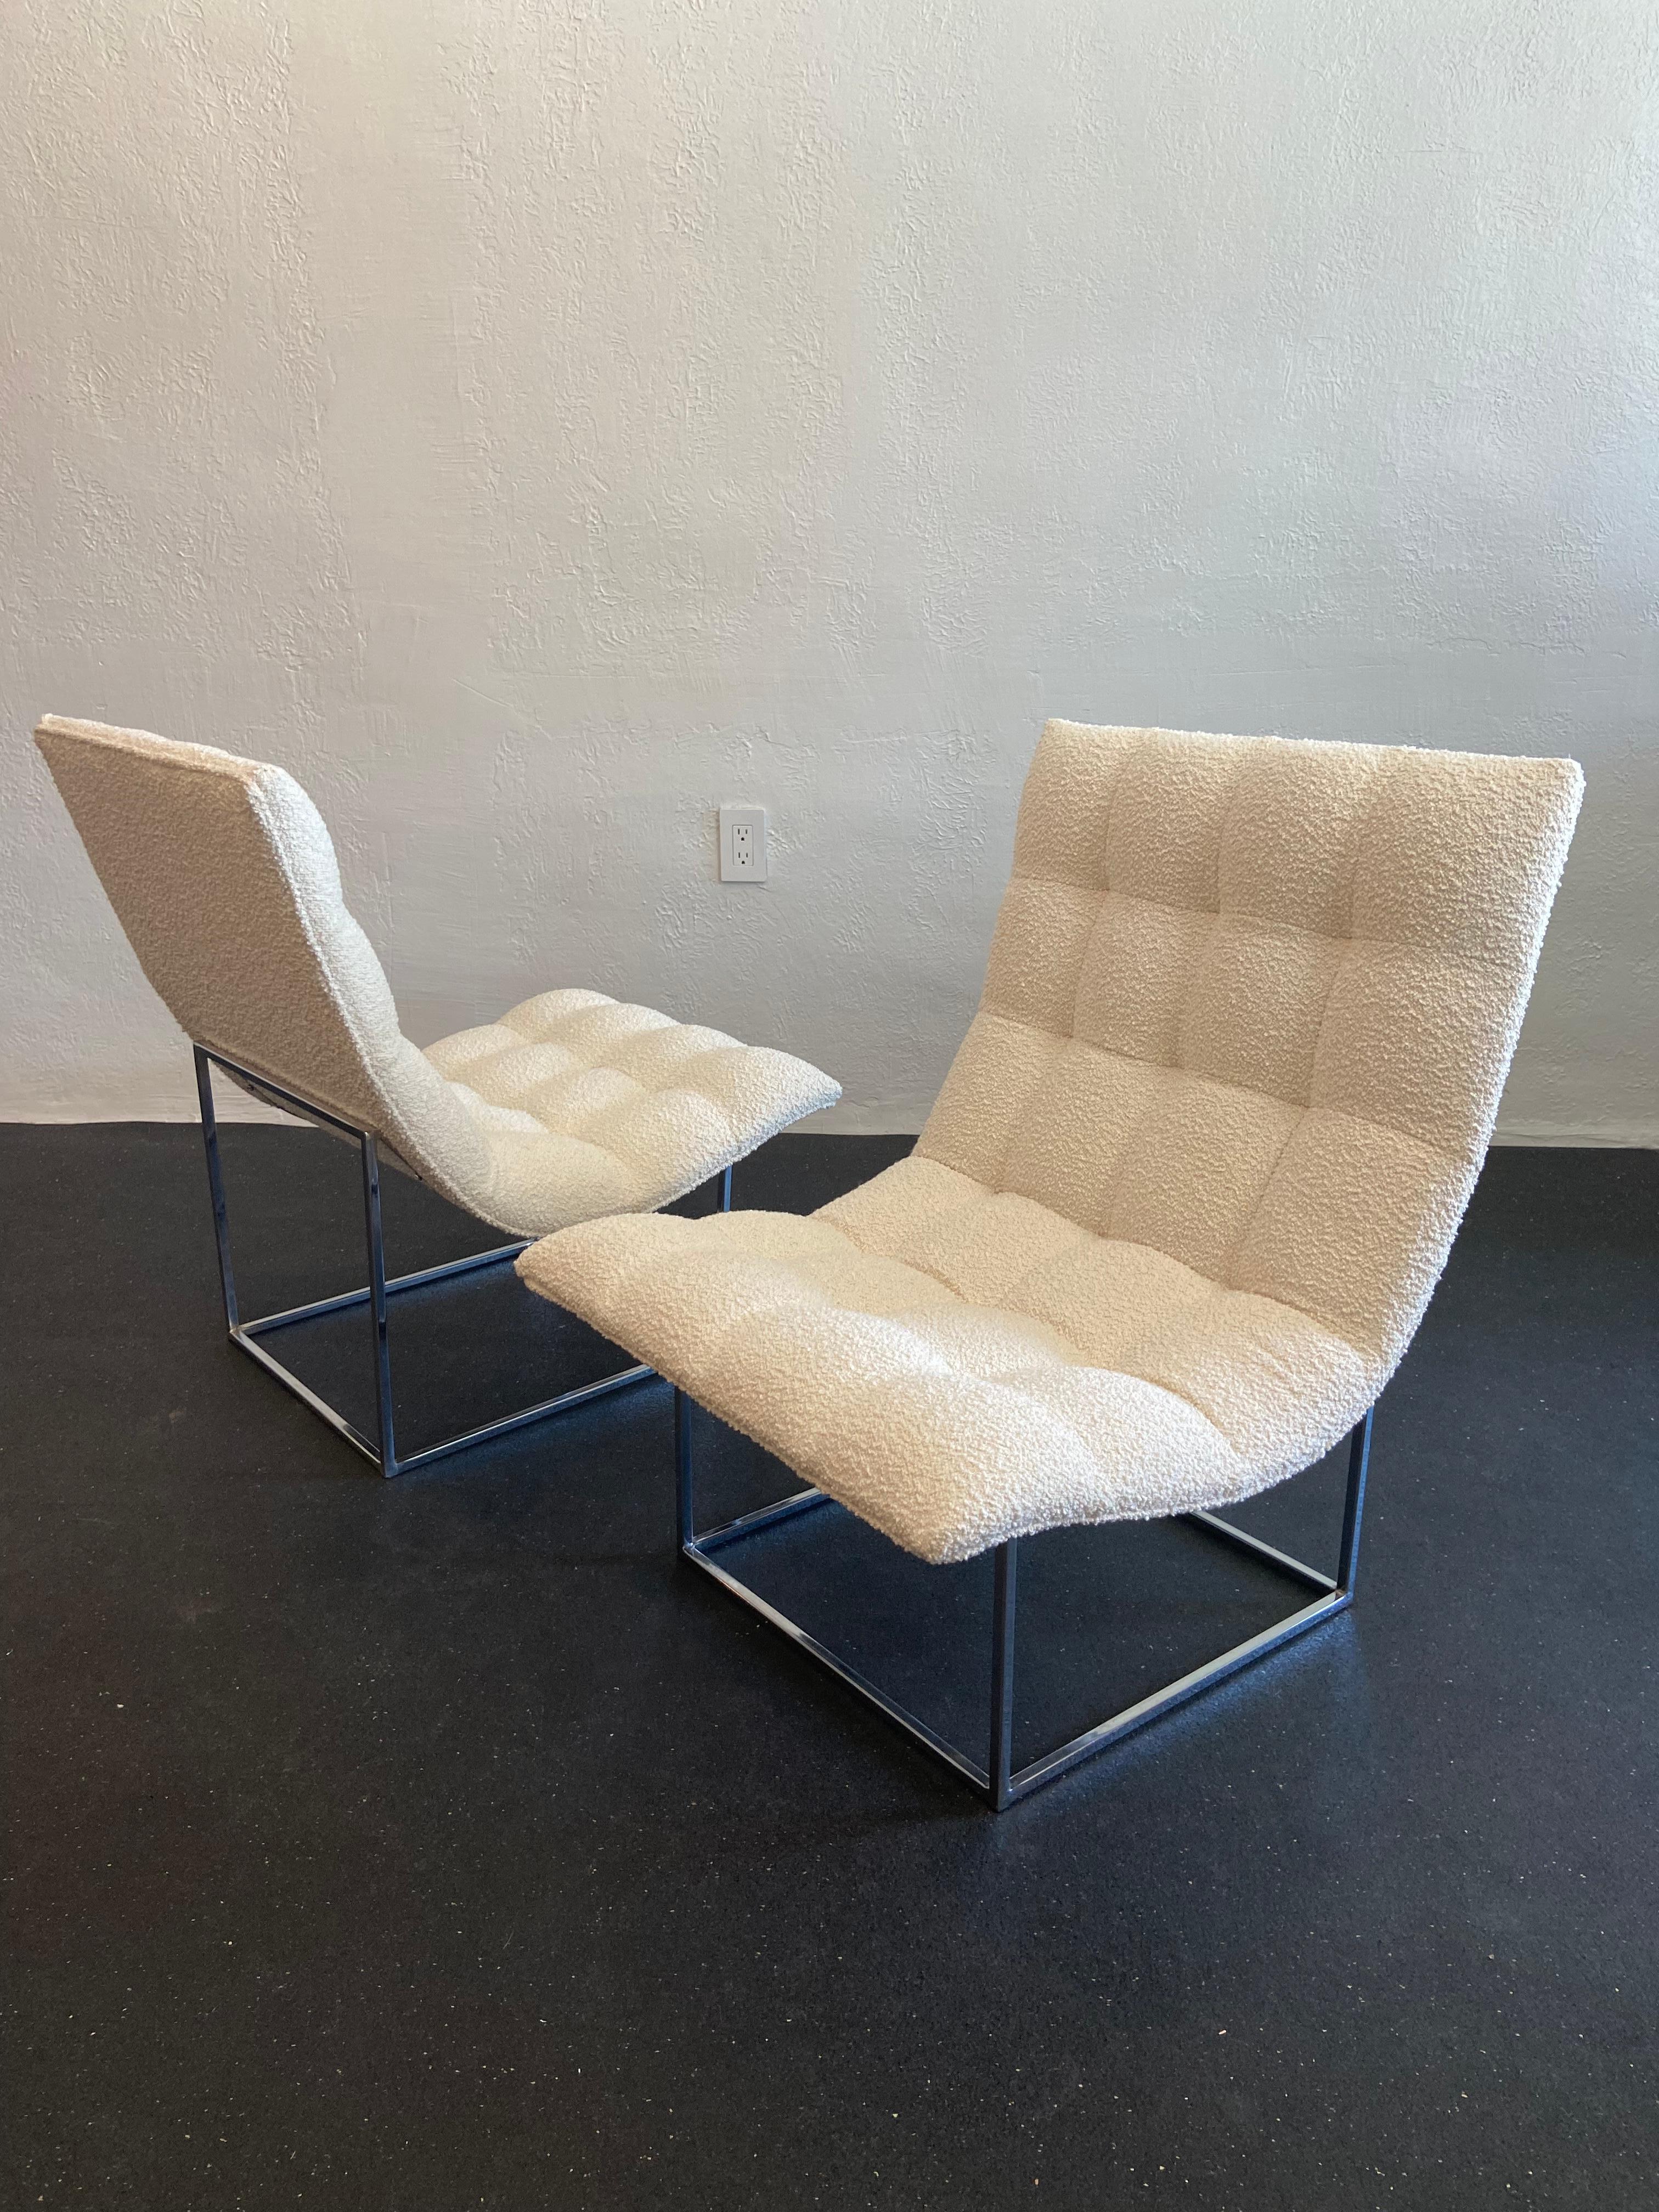 Pair of Milo Baughman for Thayer Coggin scoop lounge chairs. Reupholstered in a rich natural toned bouclé. There are no labels present. Slight patina to the bases at some of the joints. (Please refer to photos)

Would work well in a variety of